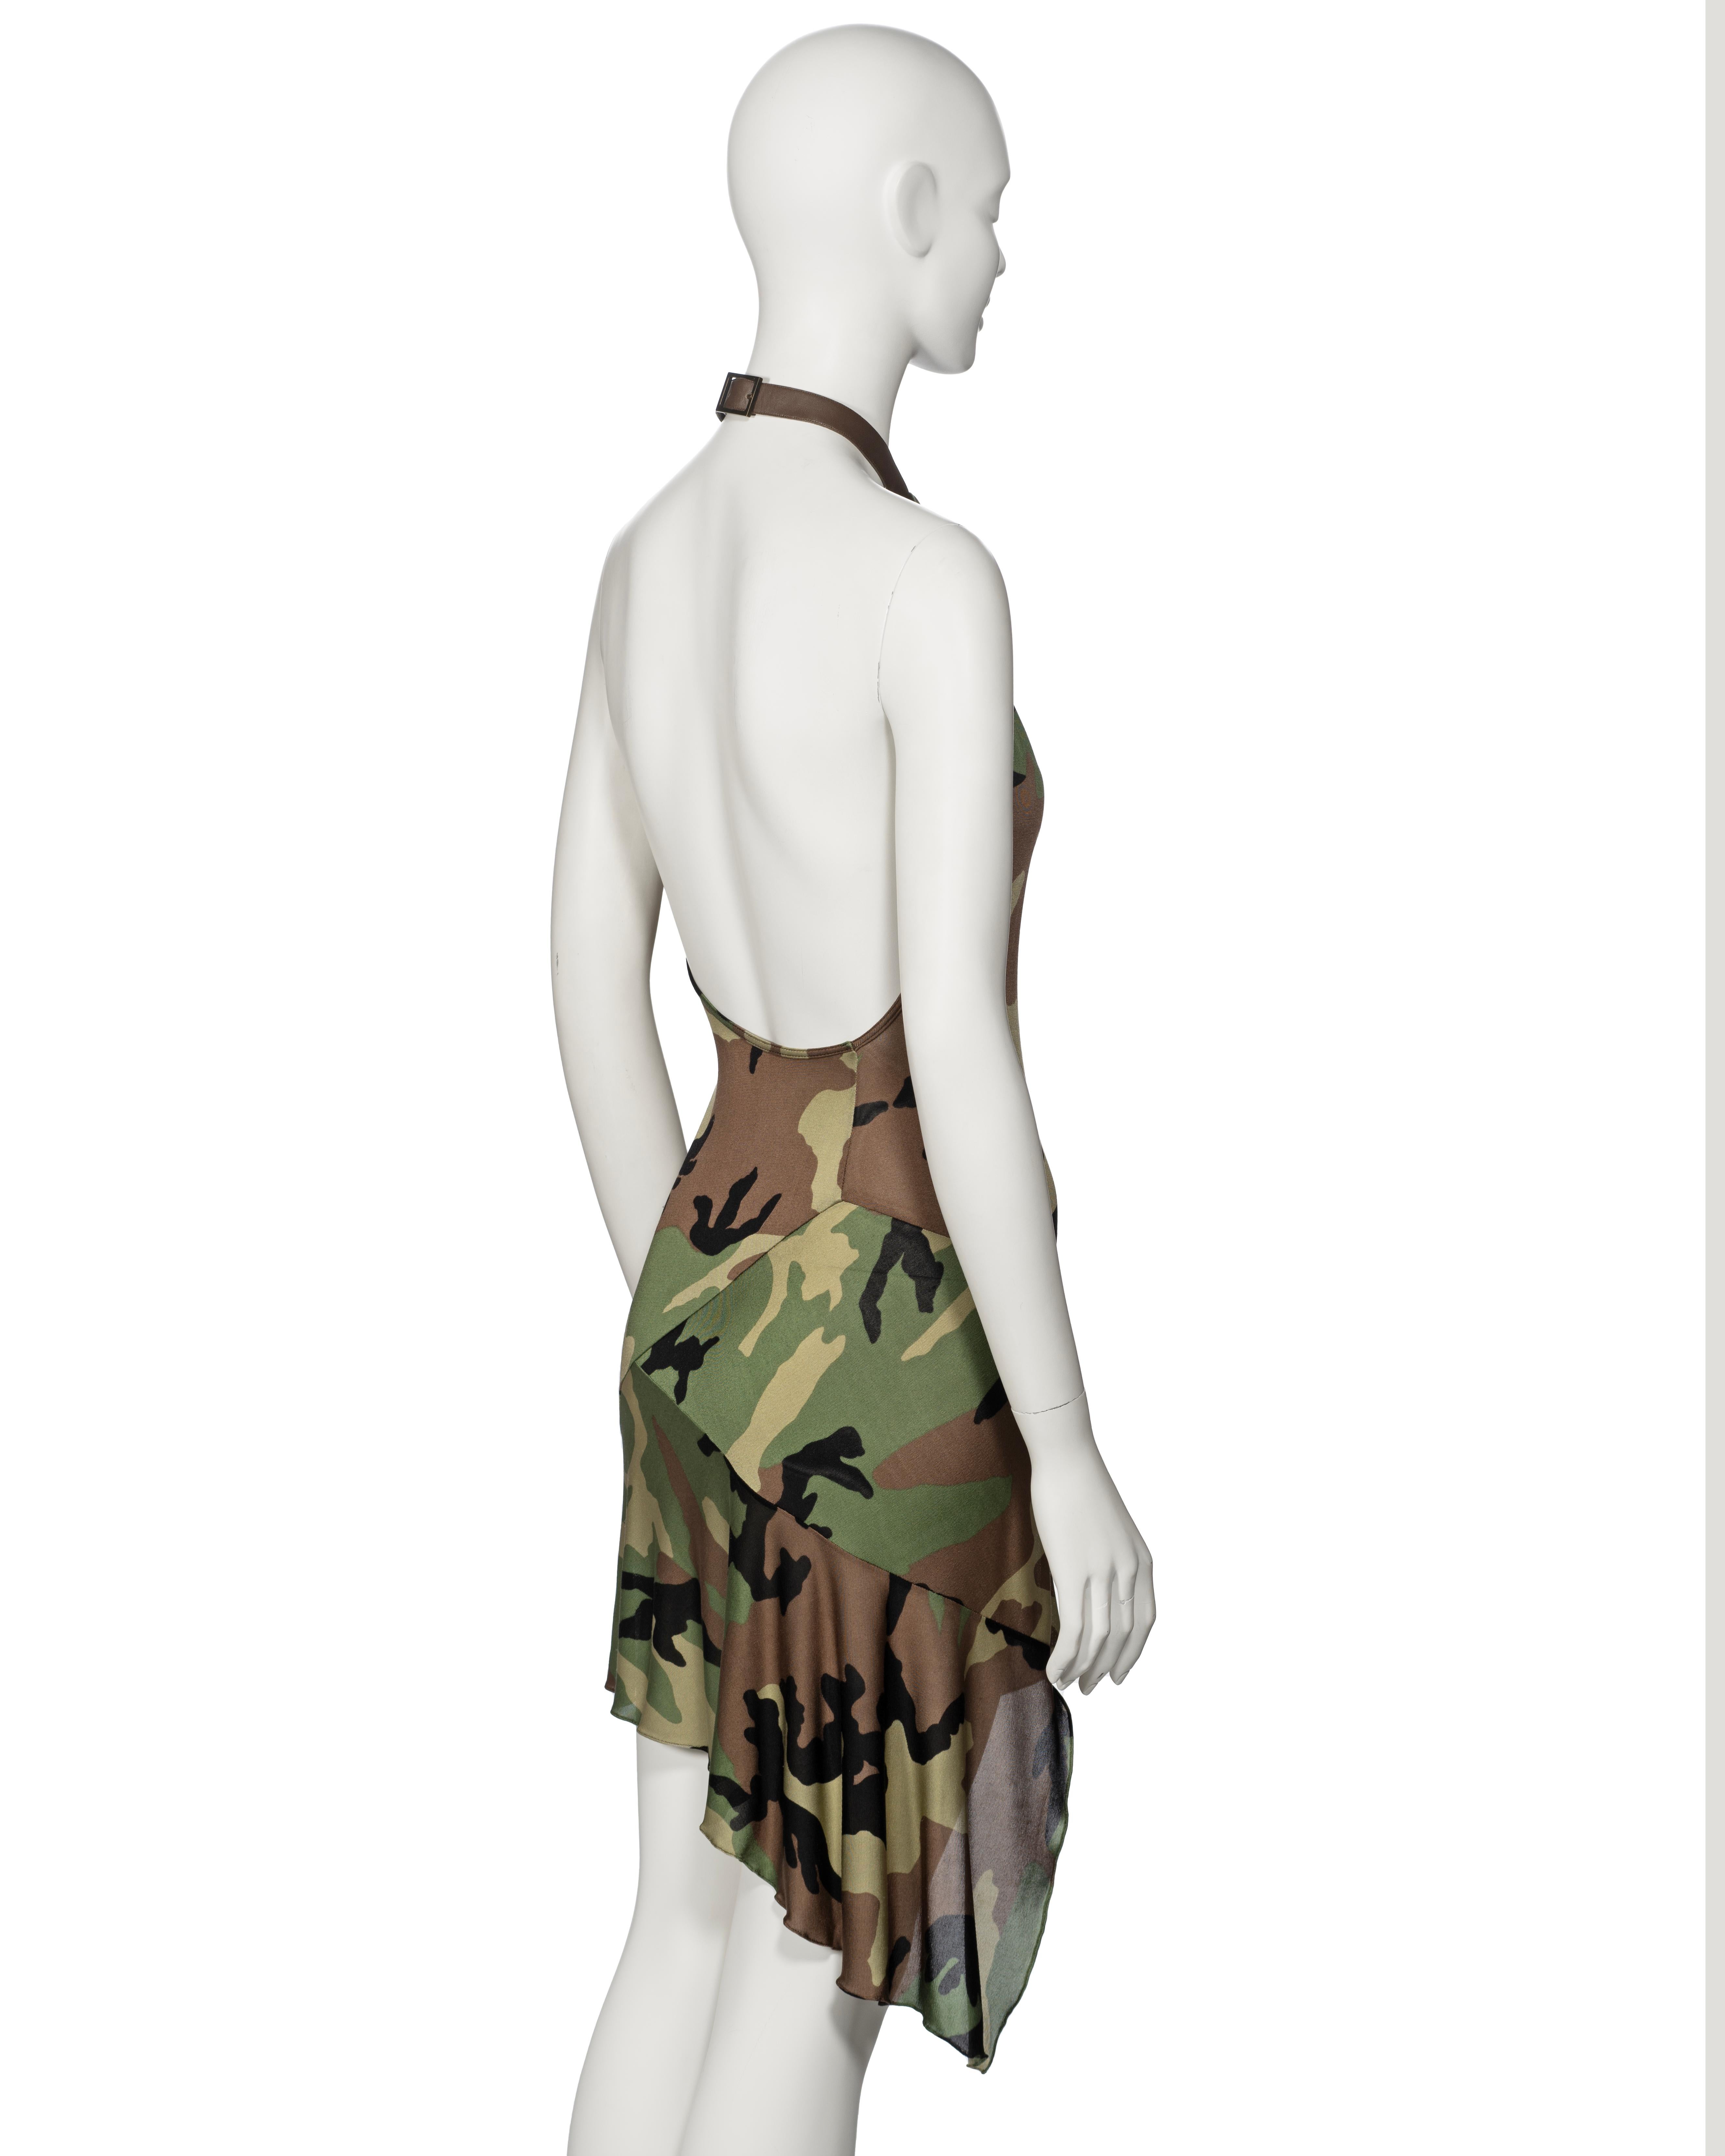 Christian Dior by John Galliano Cameo Print Silk Jersey Halter Dress, ss 2001 For Sale 3